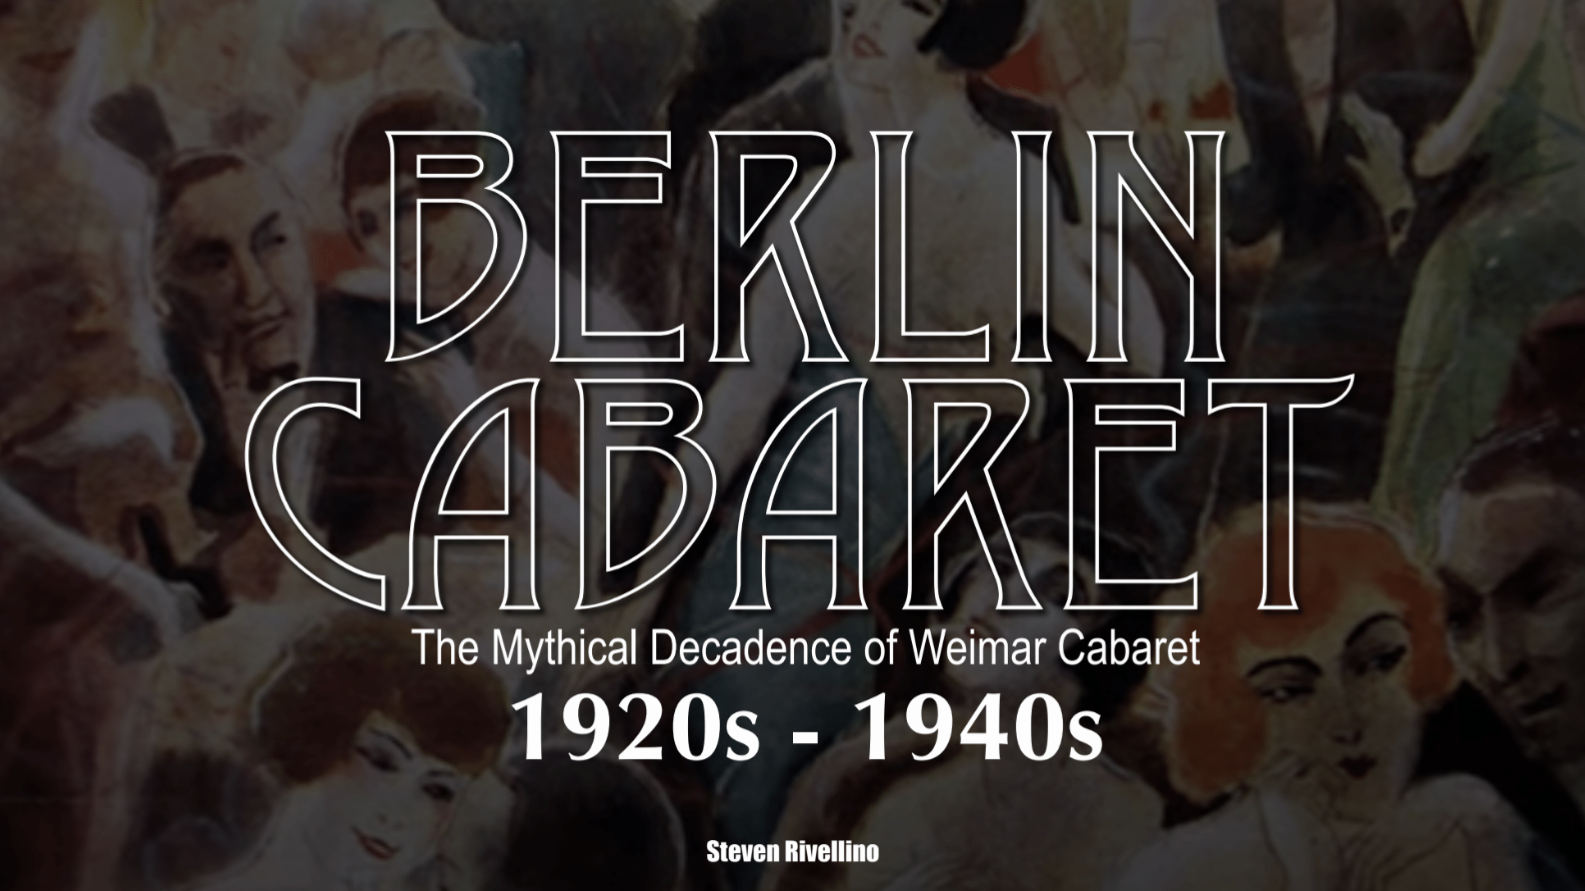 Open VISIONS Forum Espresso: Steven Rivellino – “Berlin Cabaret 1920s – 1940s. The Mythical Decadence of Weimar Cabaret”